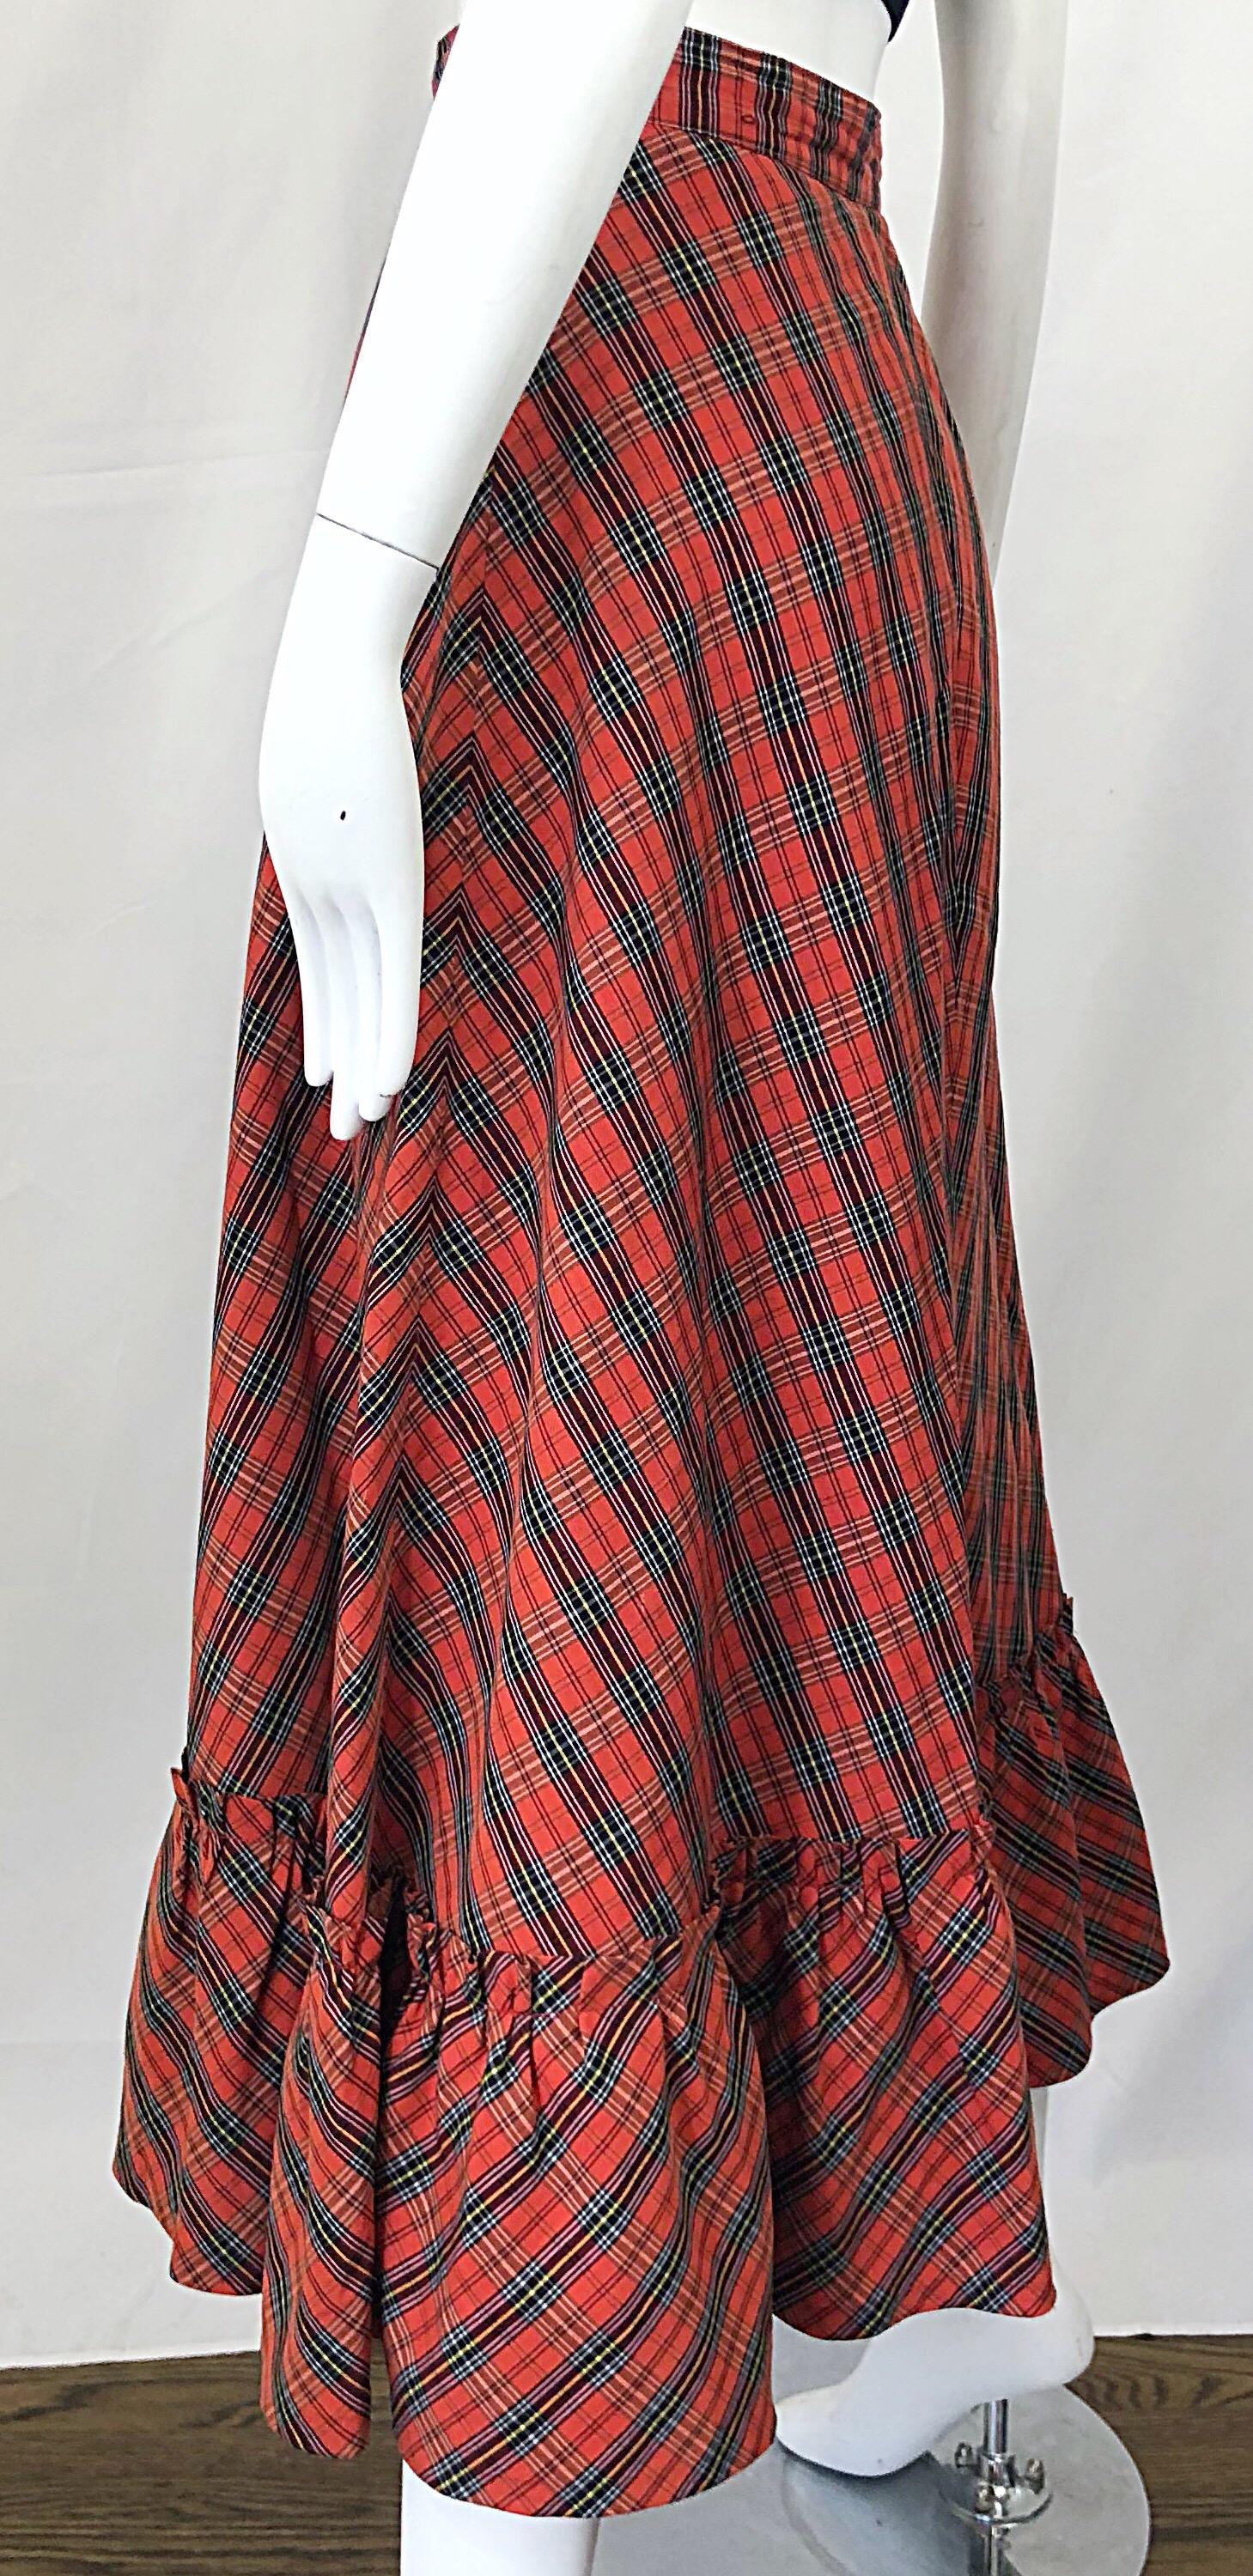 Women's 1970s Red Plaid Cotton Voile Ruffled Hem Vintage 70s Maxi Skirt For Sale